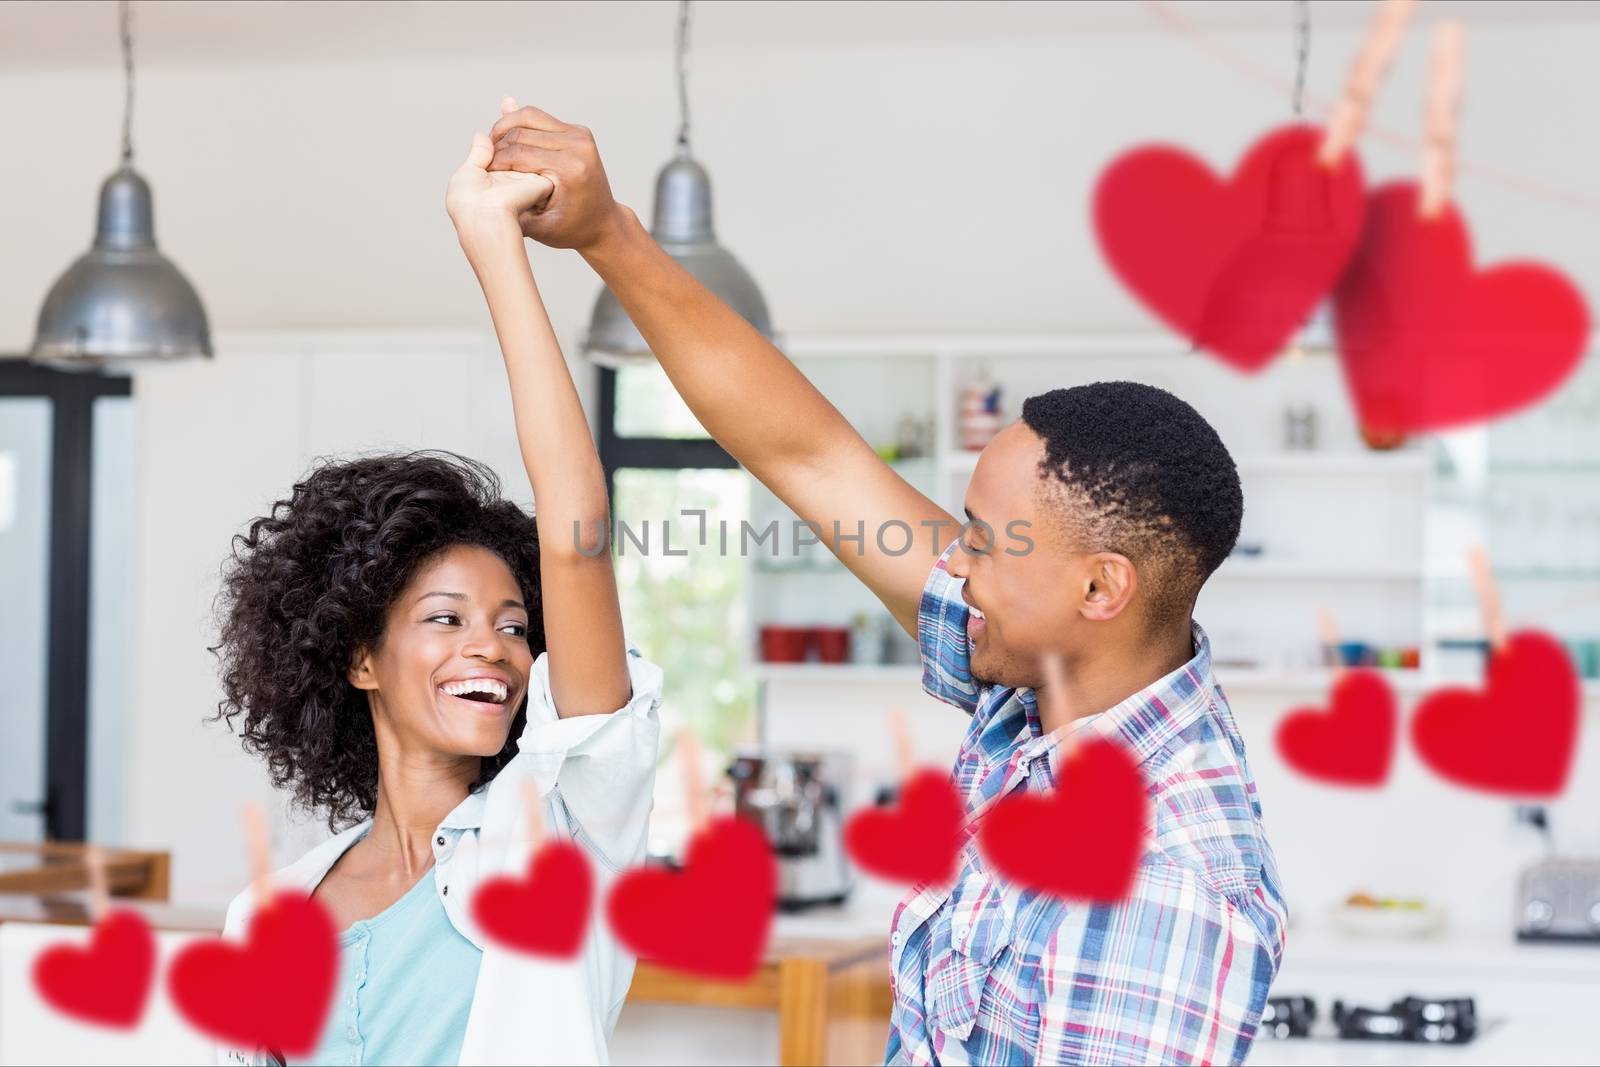 Romantic couple dancing against hanging red hearts